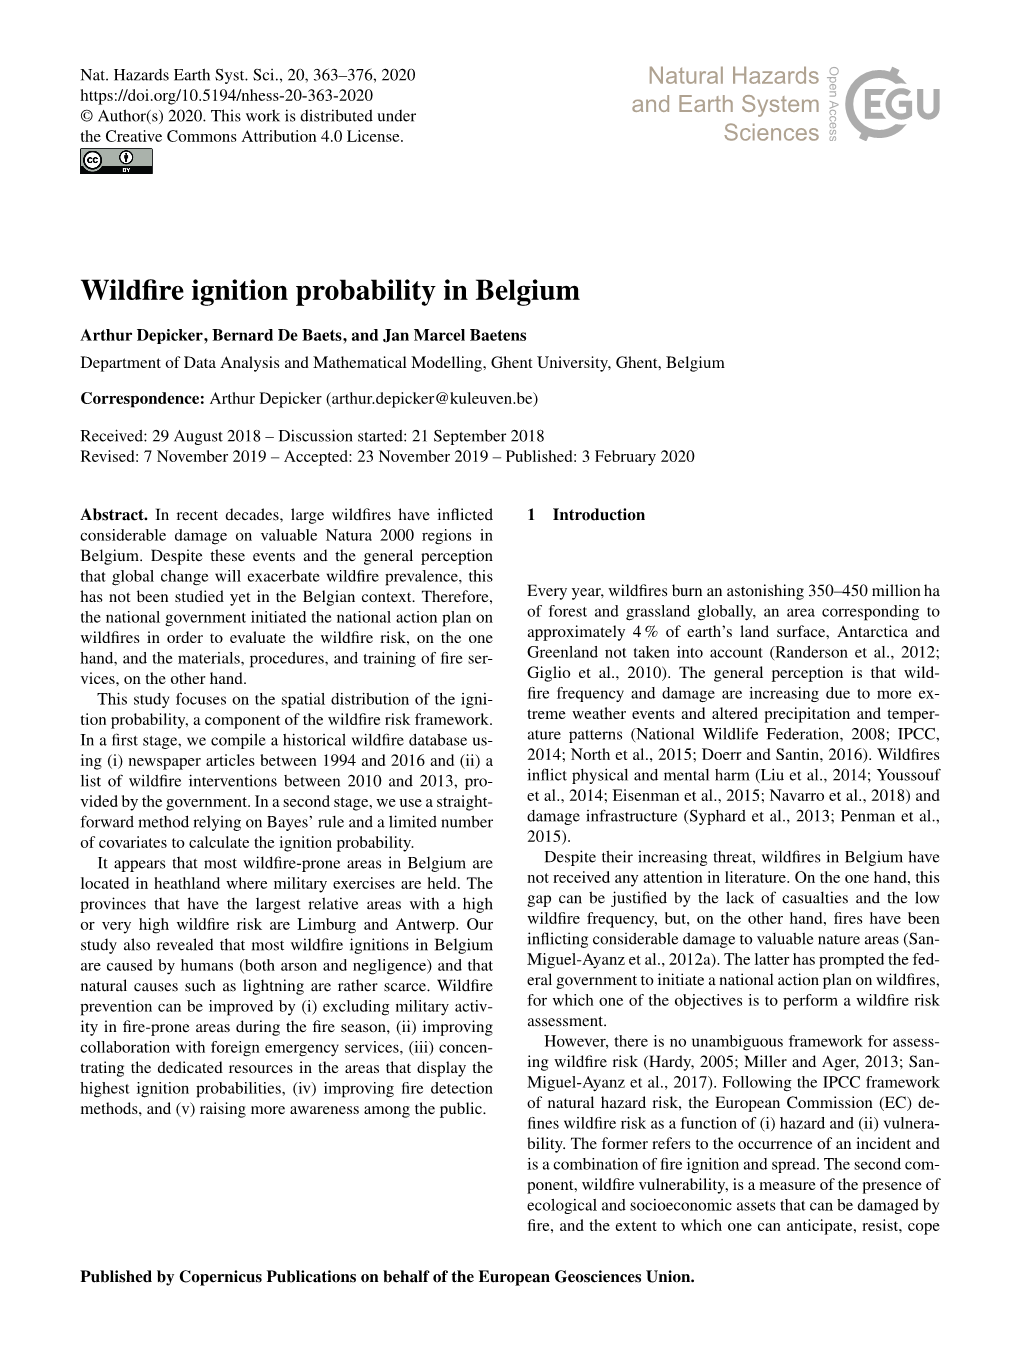 Wildfire Ignition Probability in Belgium